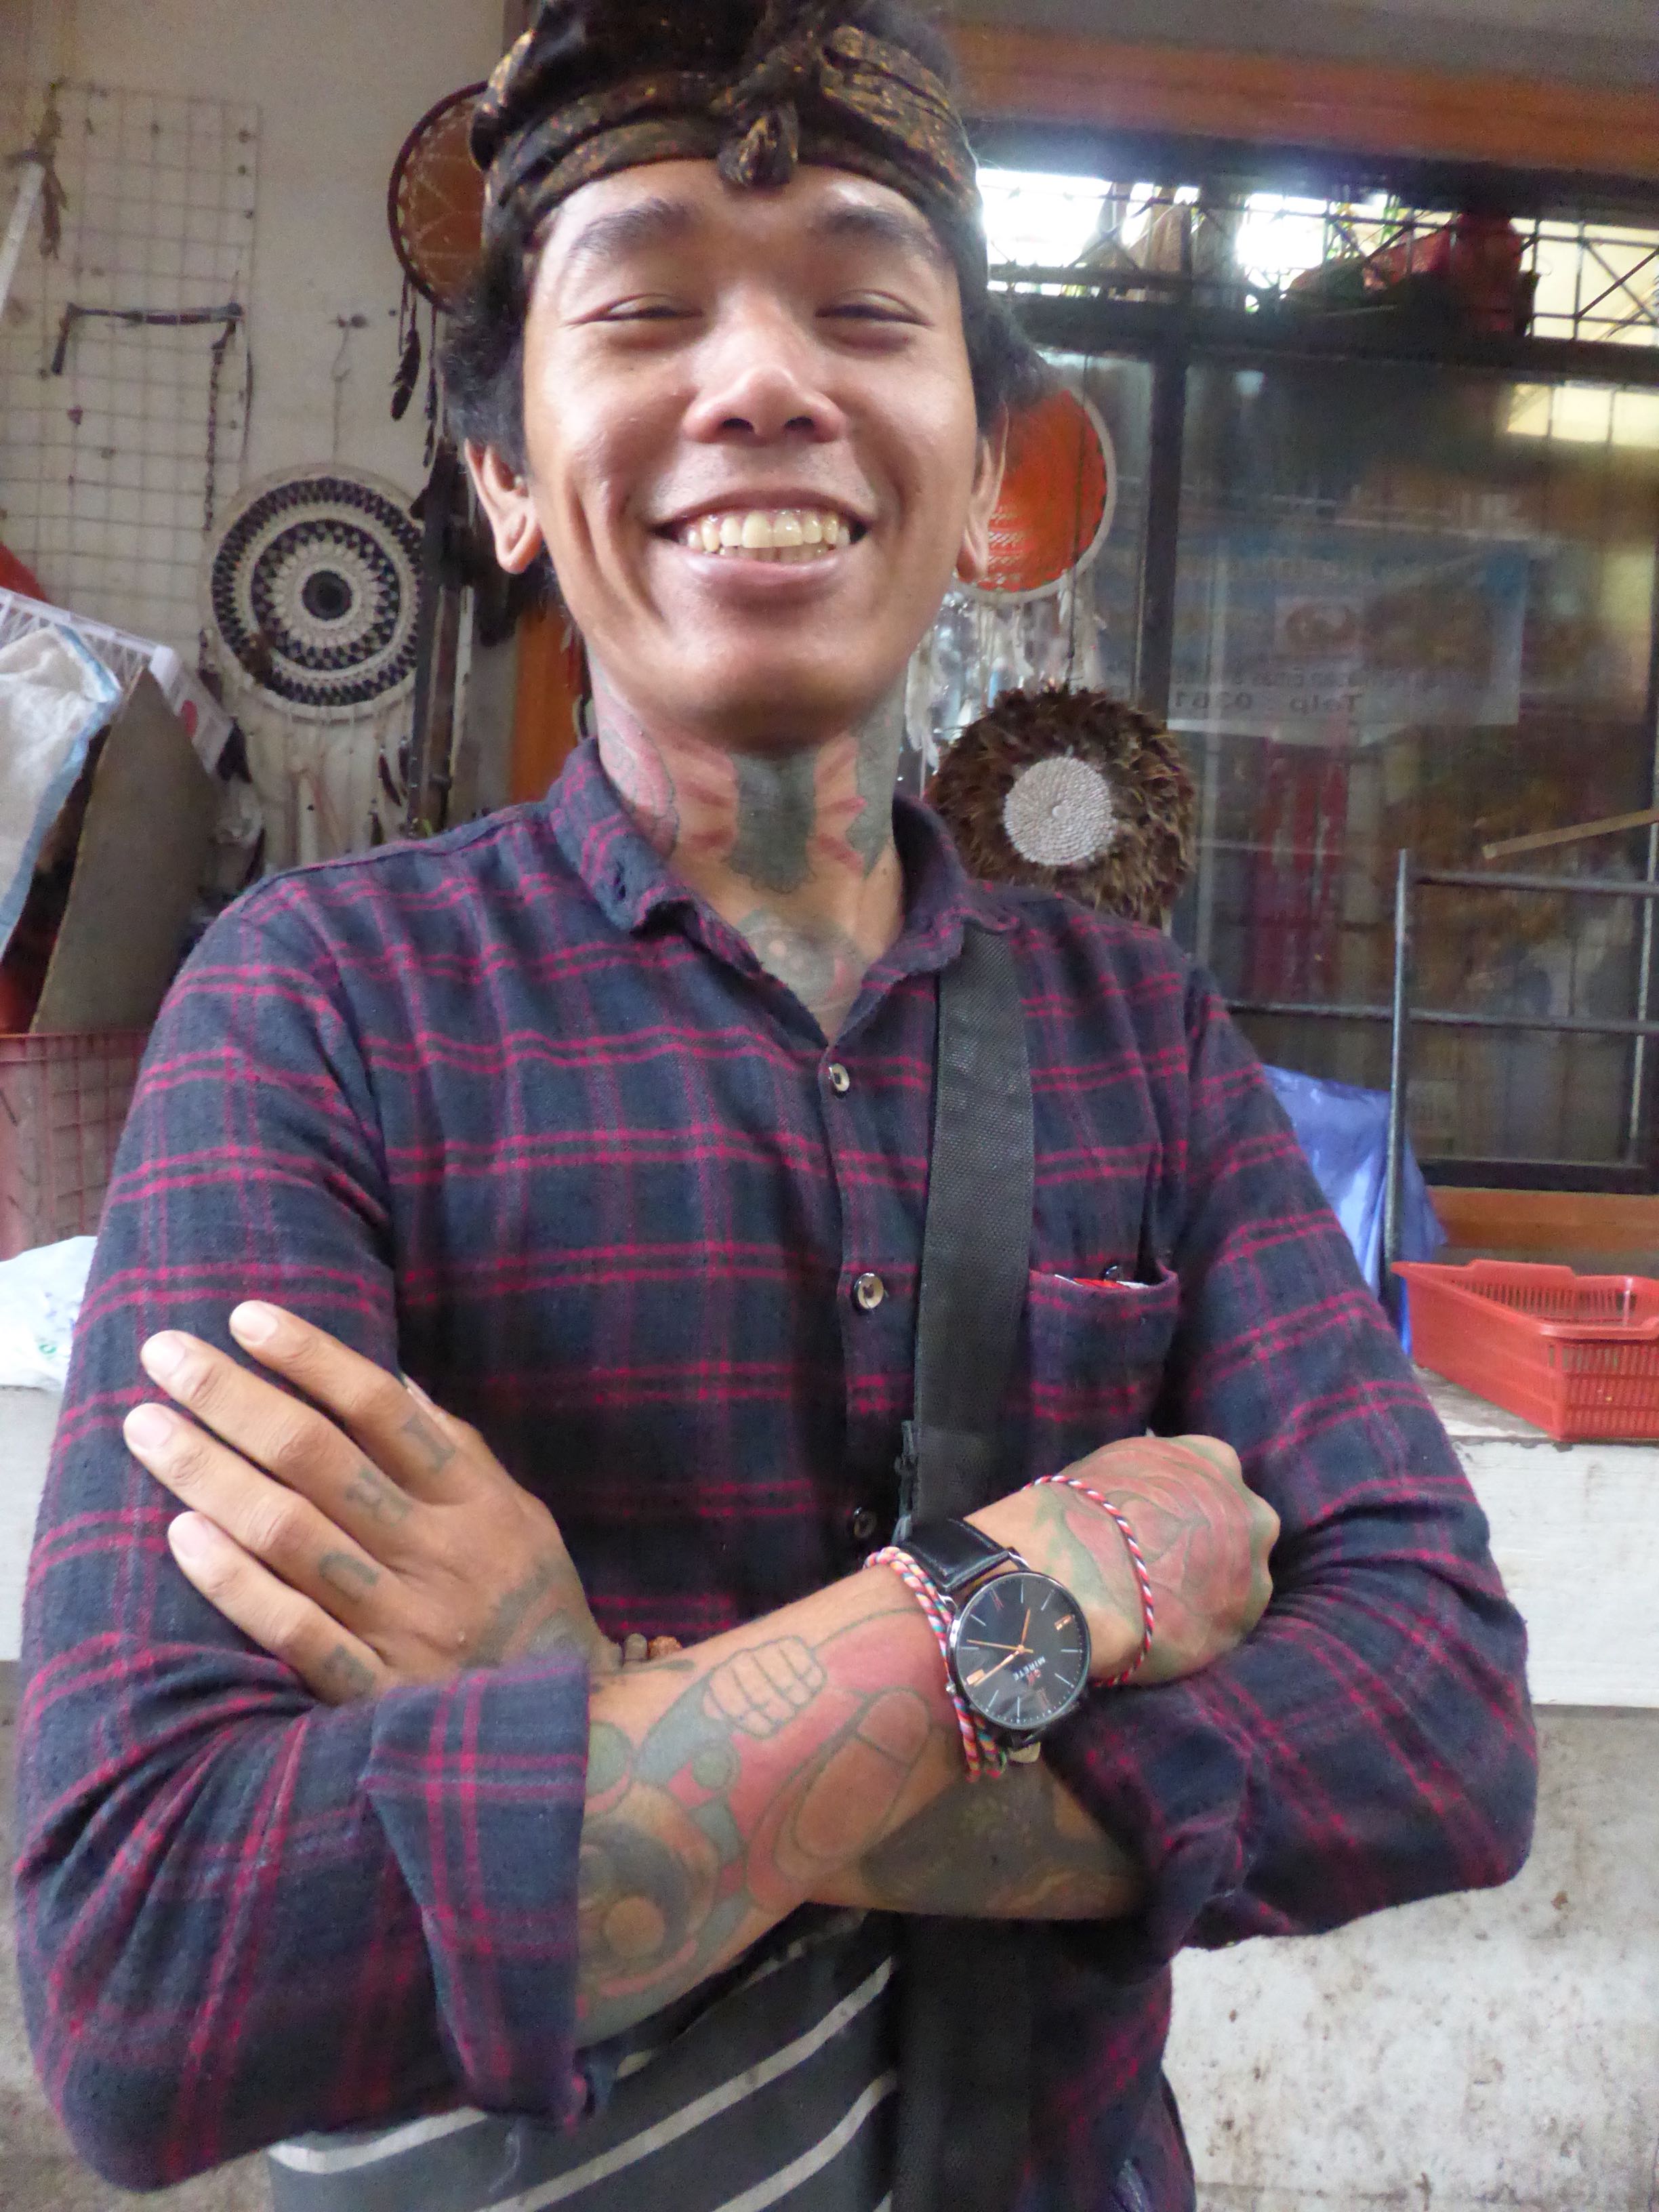 smiling man with tattoos